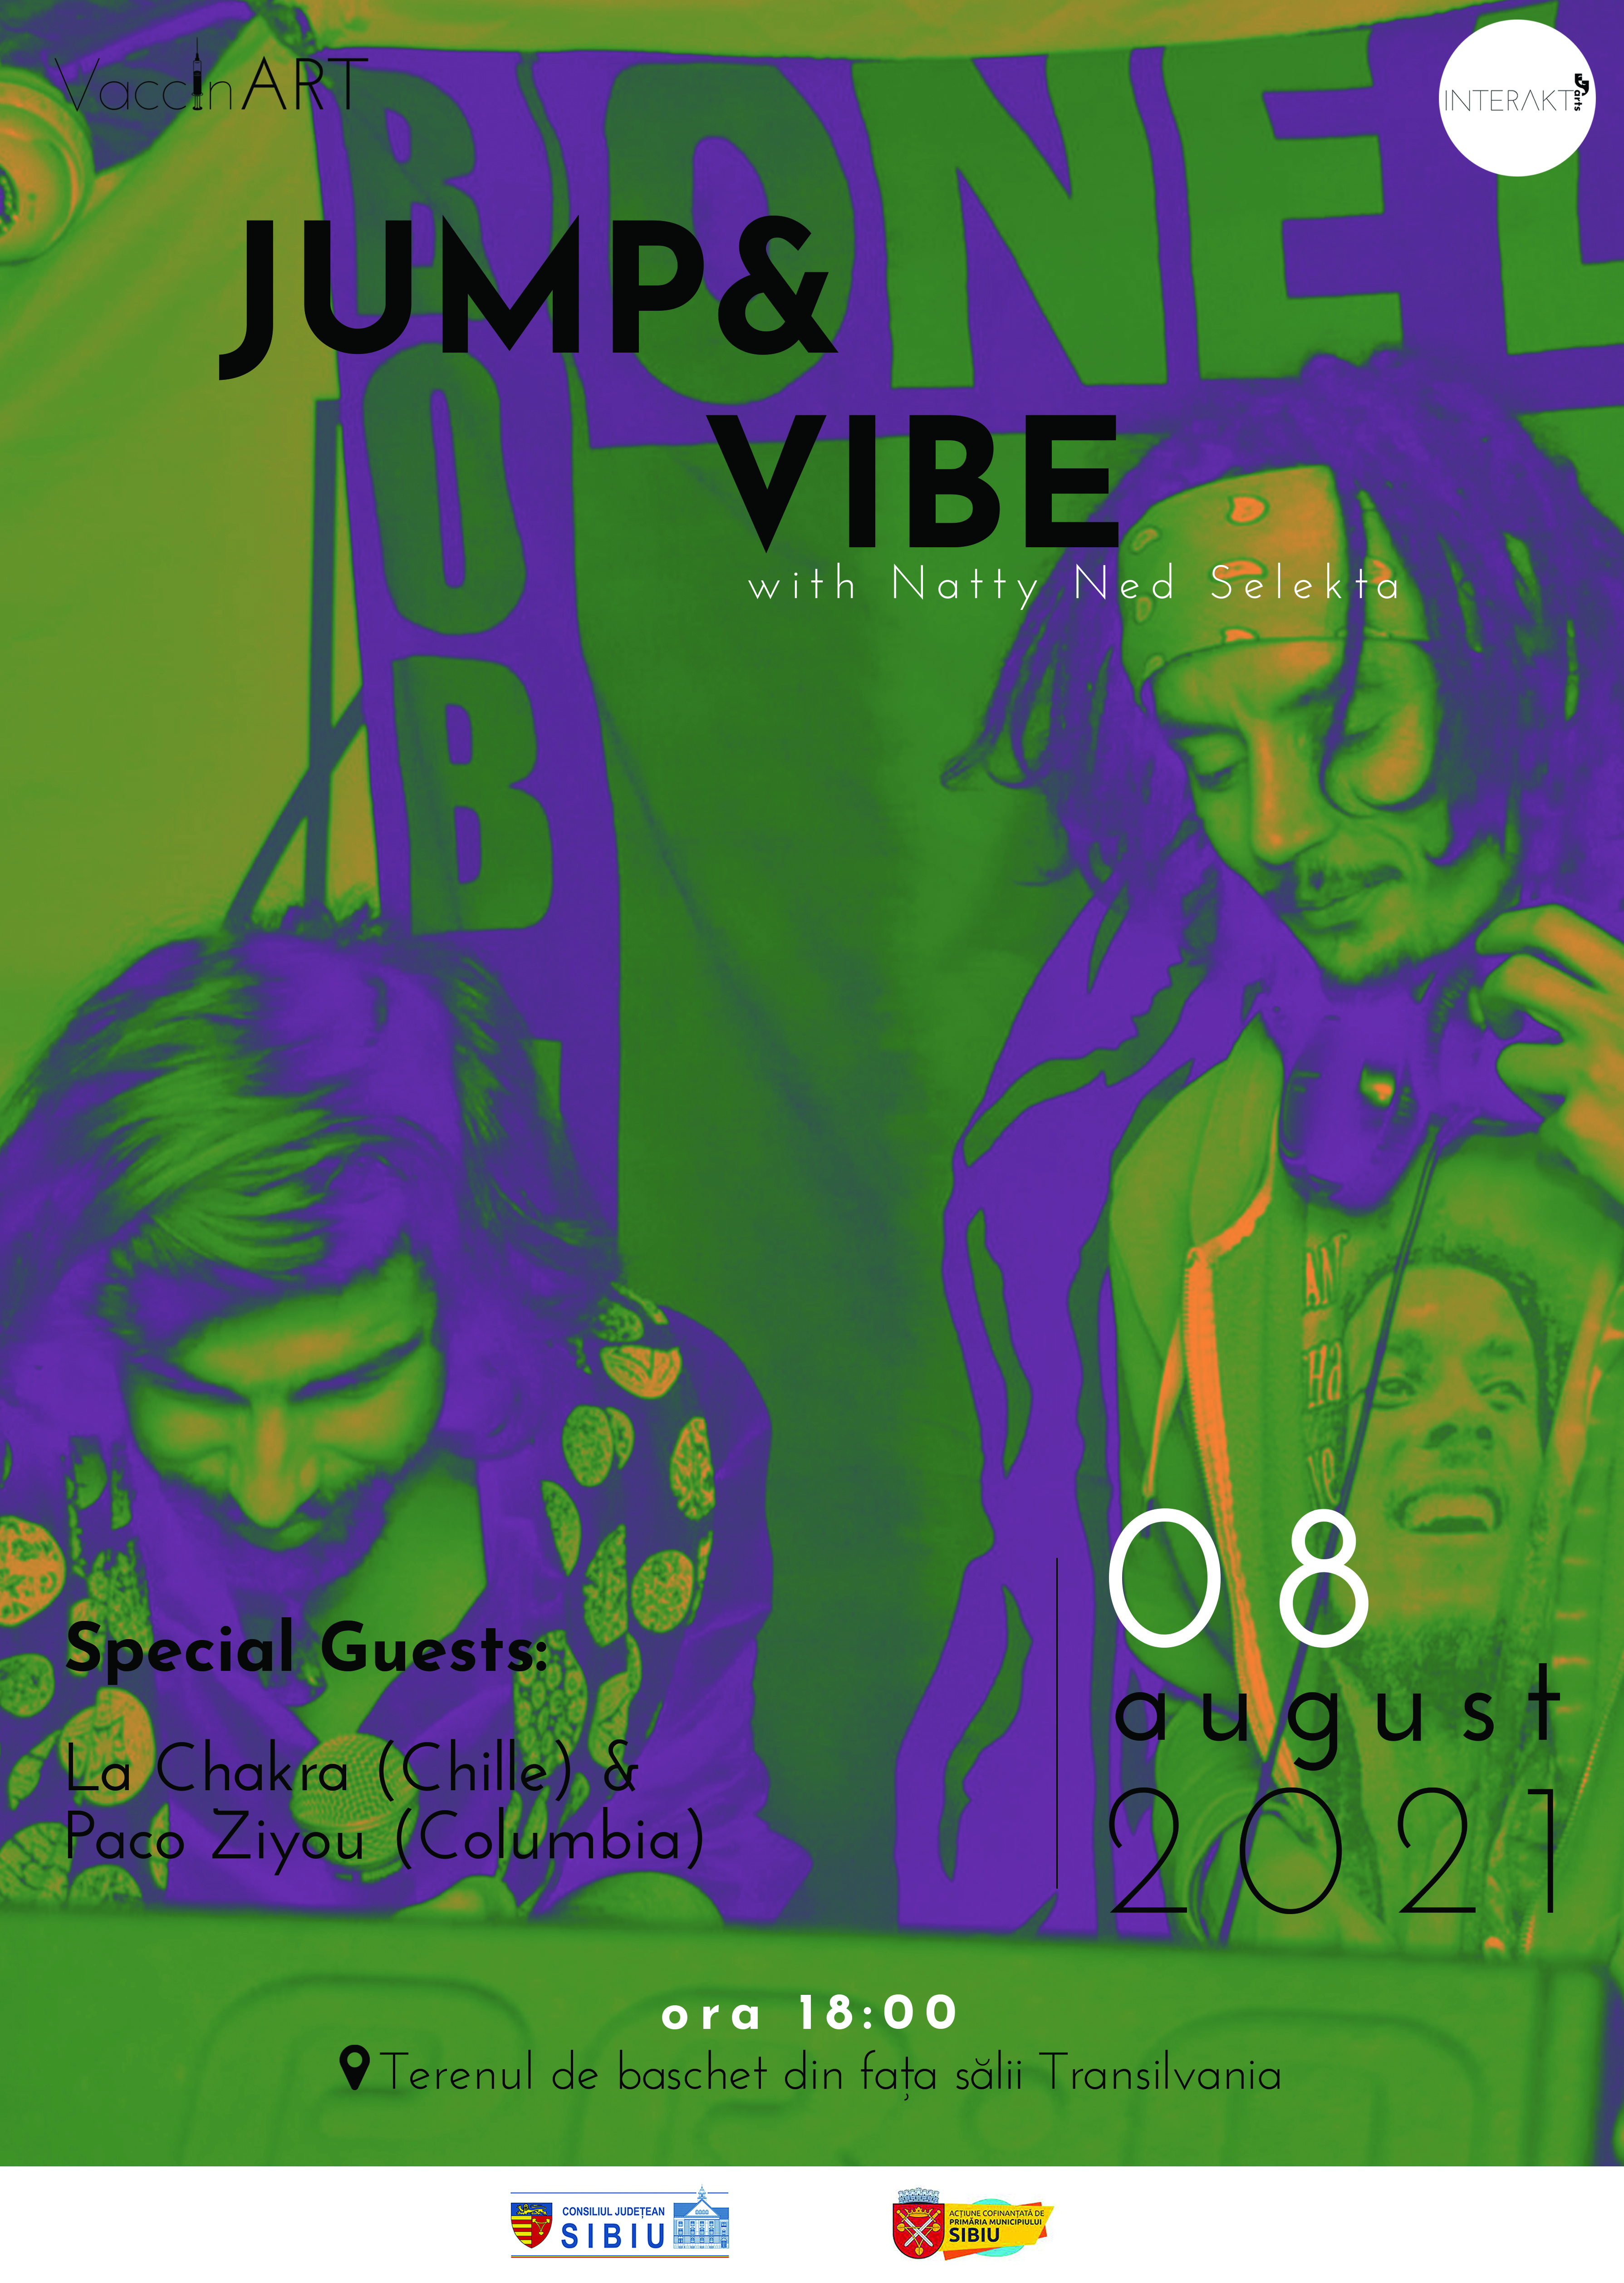 VaccinART: Jump & Vibe with Natty Ned Selekta- Special Guests: La Chakra (Chille) & Paco Ziyou (DJ mix live show)